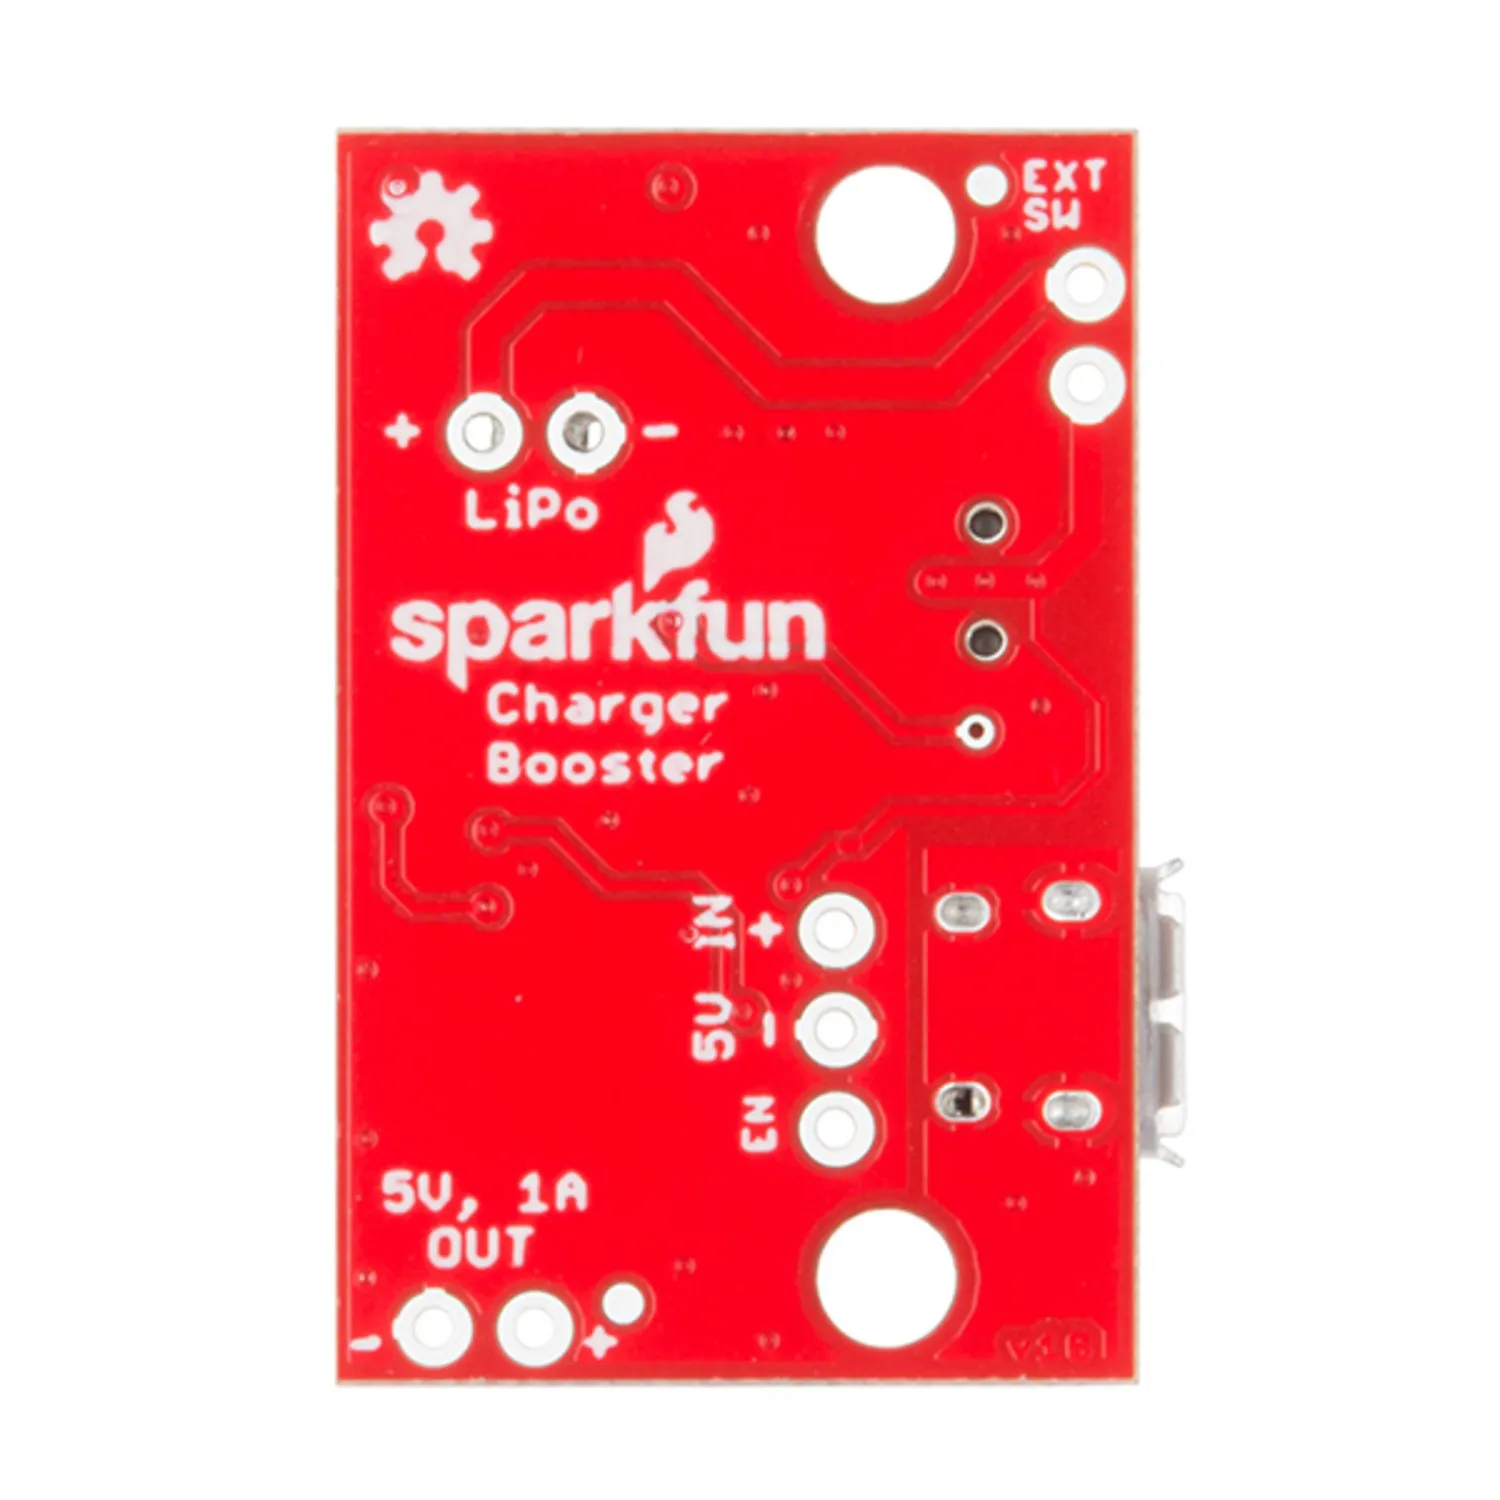 Photo of SparkFun LiPo Charger/Booster - 5V/1A